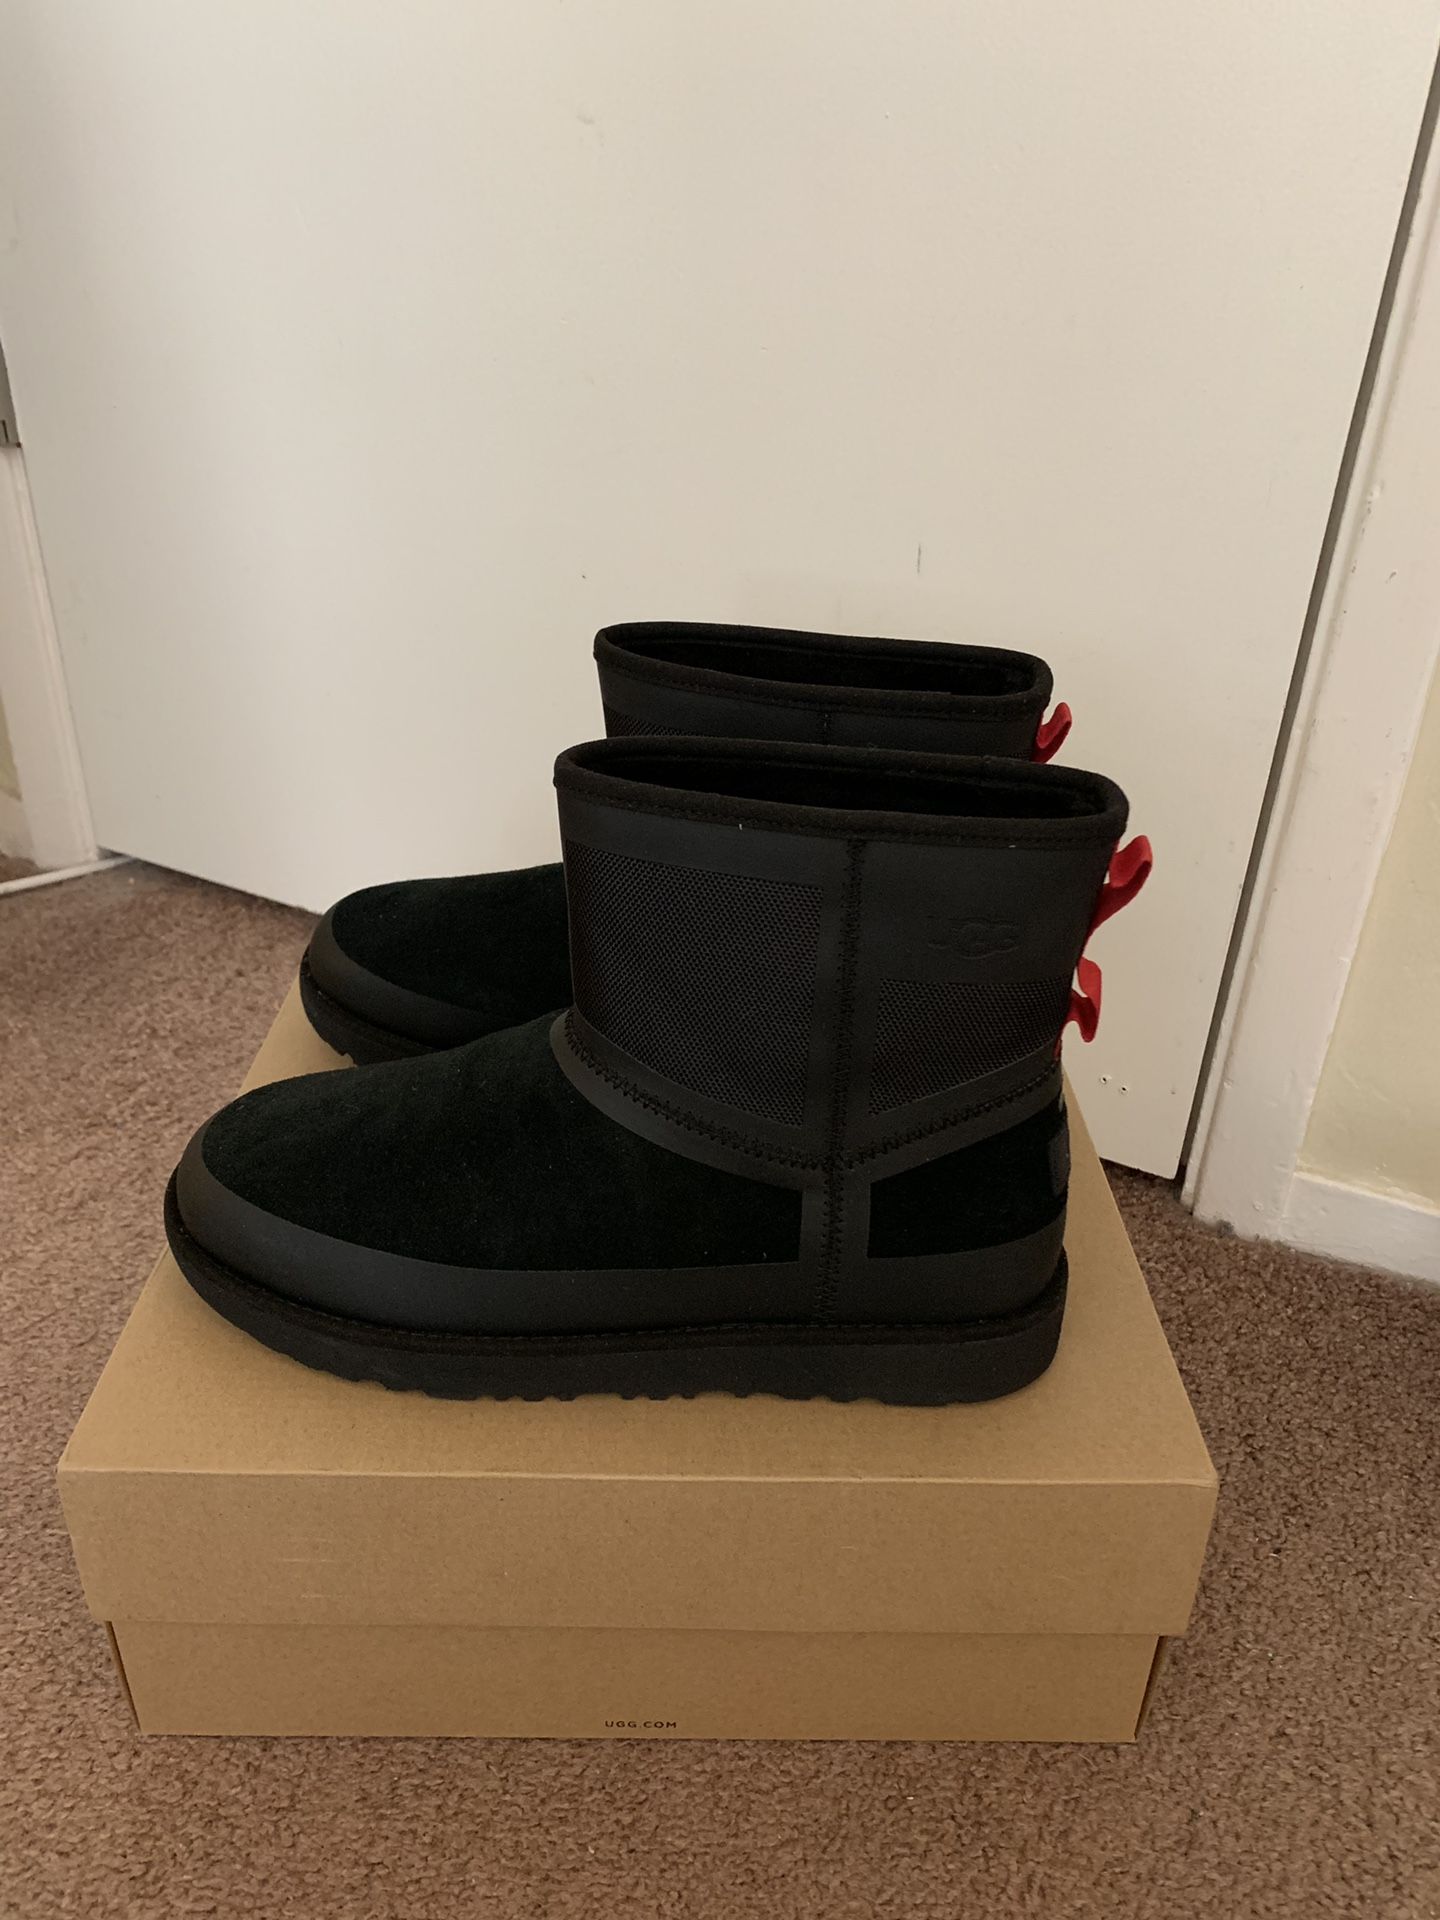 100% Authentic Brand New in Box UGG Classic Mini Urban Tech Waterproof Boots / Men Size 10 / Color: Black